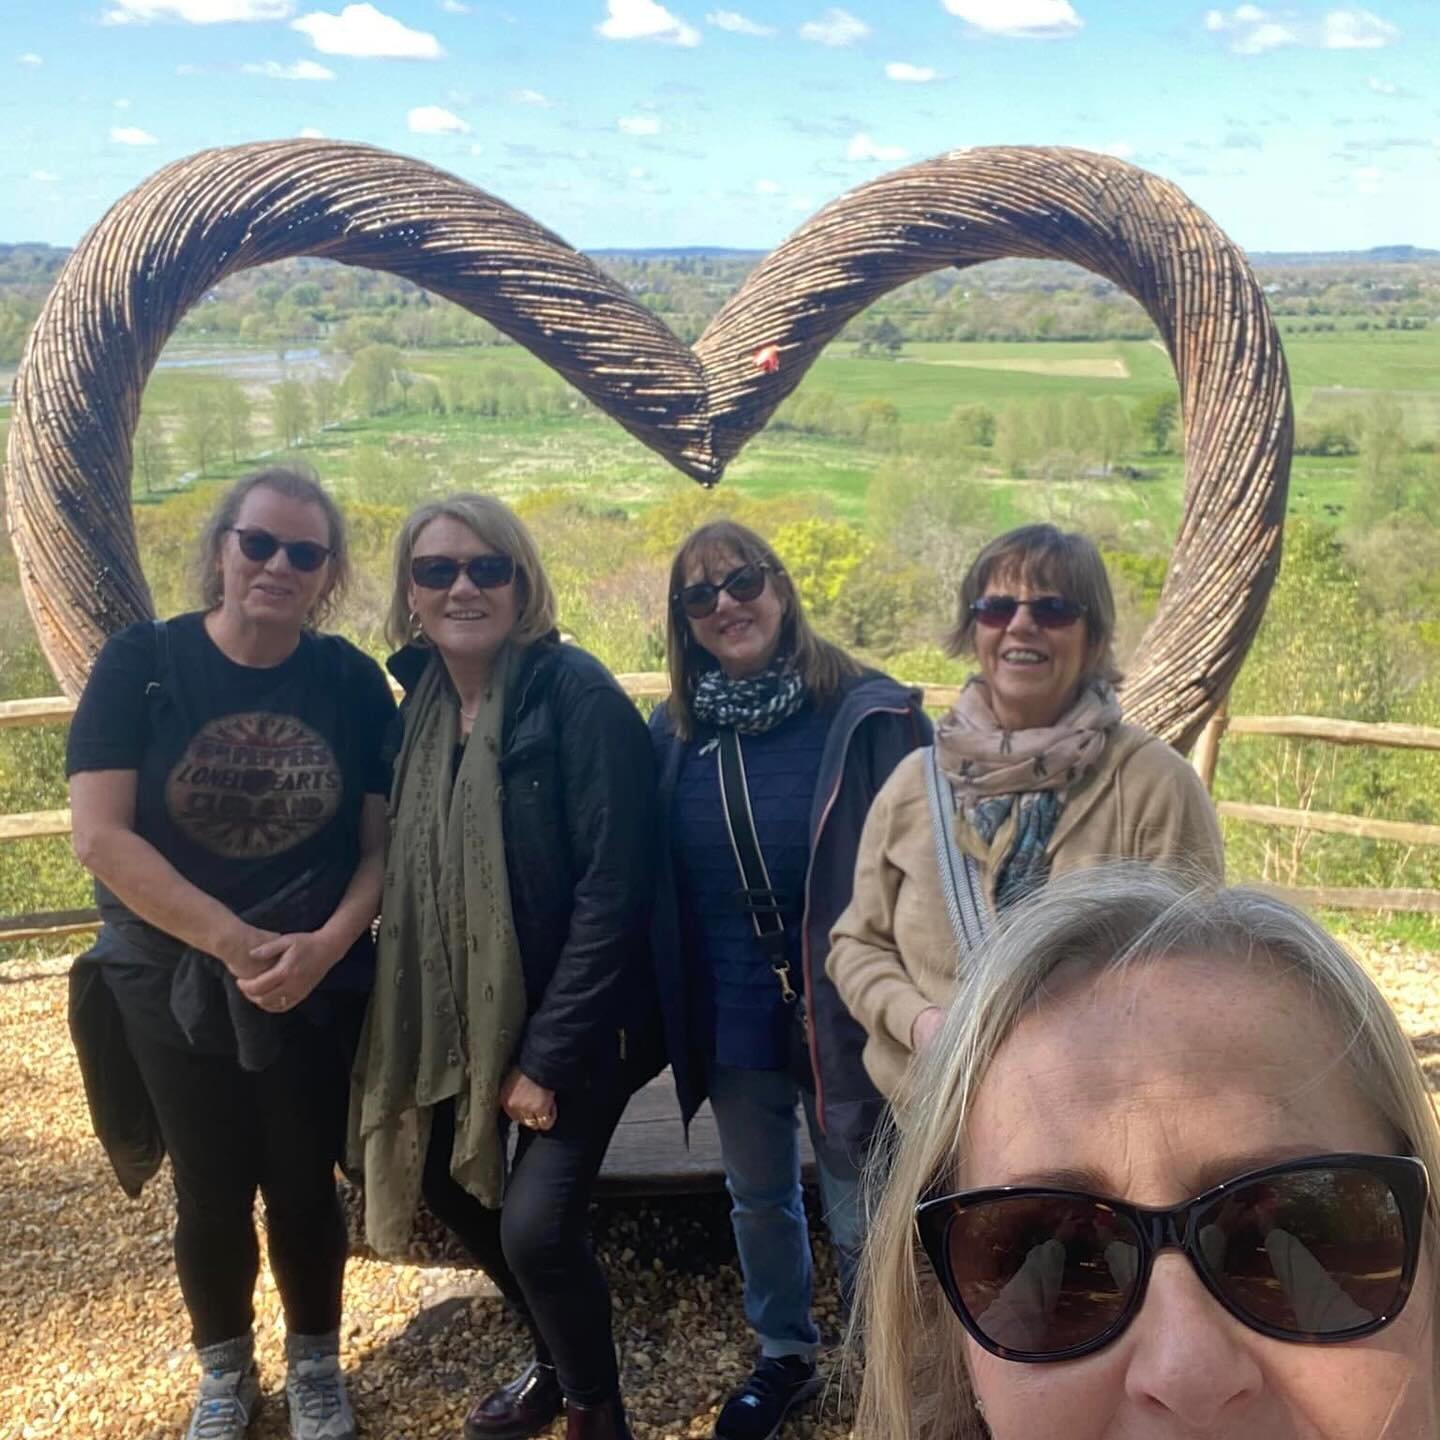 Once a Tolworth Girl, always a Tolworth Girl! 💖 

At Tolworth Girls School &amp; Sixth Form, friendships last a lifetime. We&rsquo;re thrilled to share photos from a group of alumnae who have been friends for 50 years since their days at TGS! 📸👭

